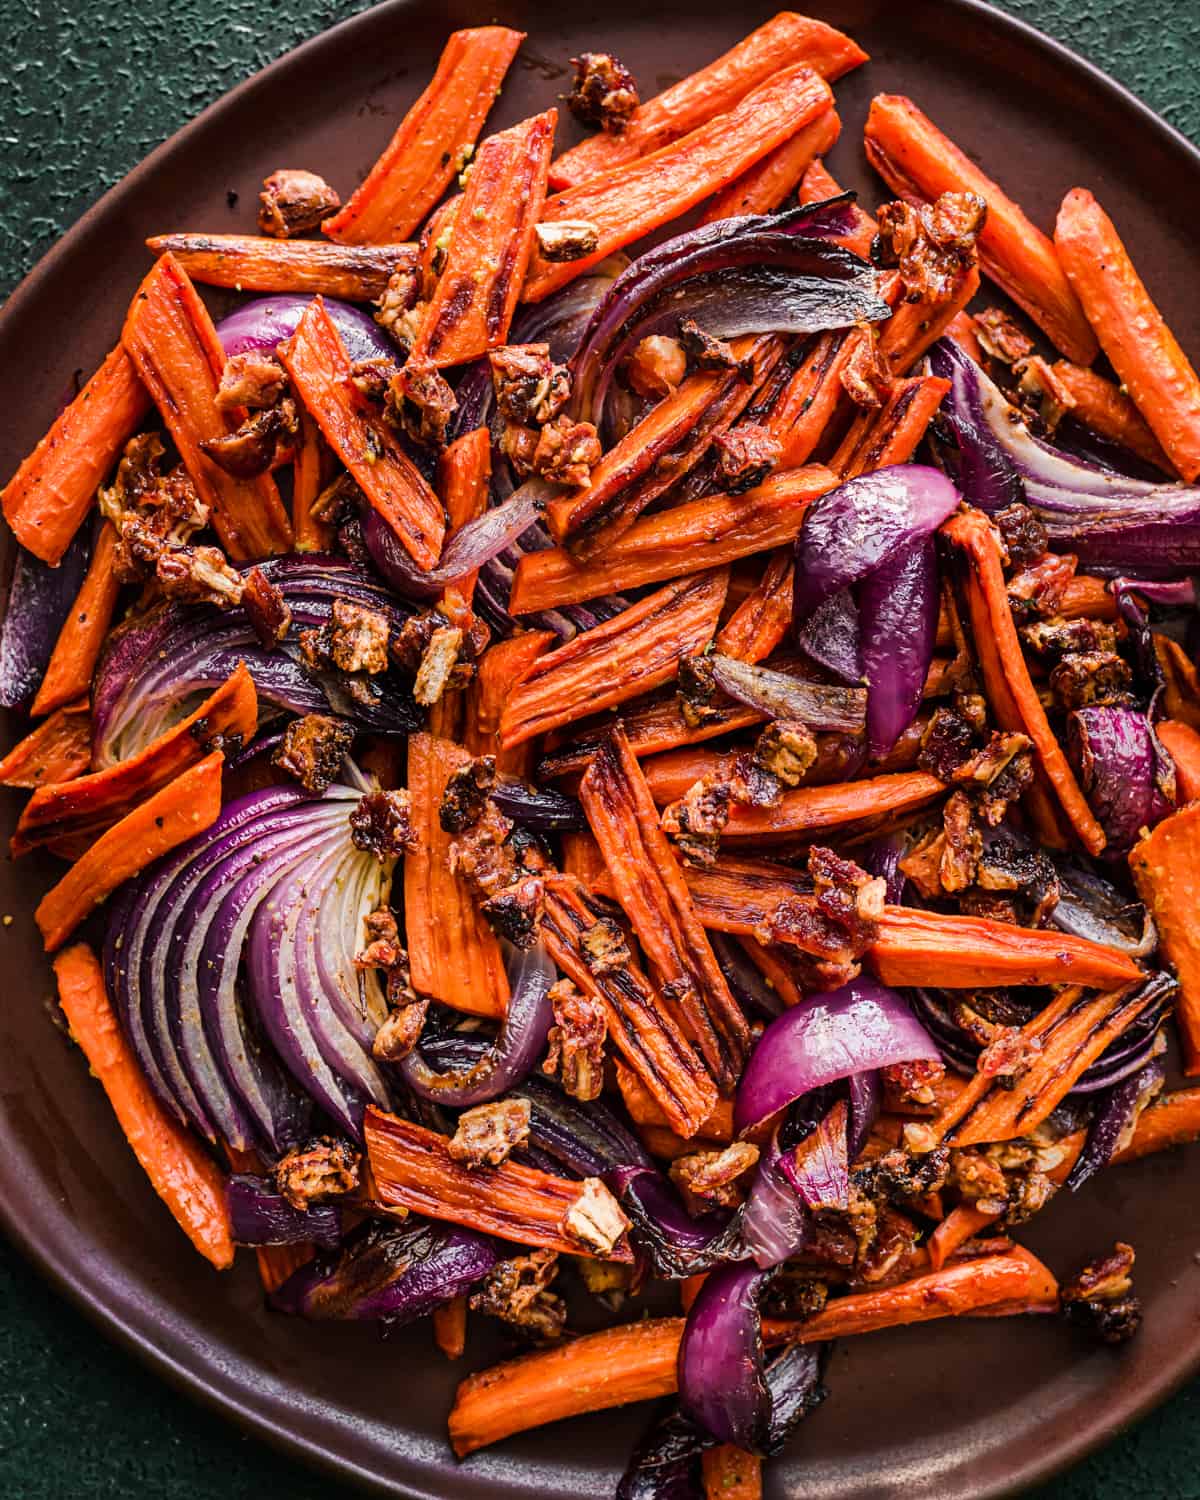 Carrots, dates and onions on a brown plate.